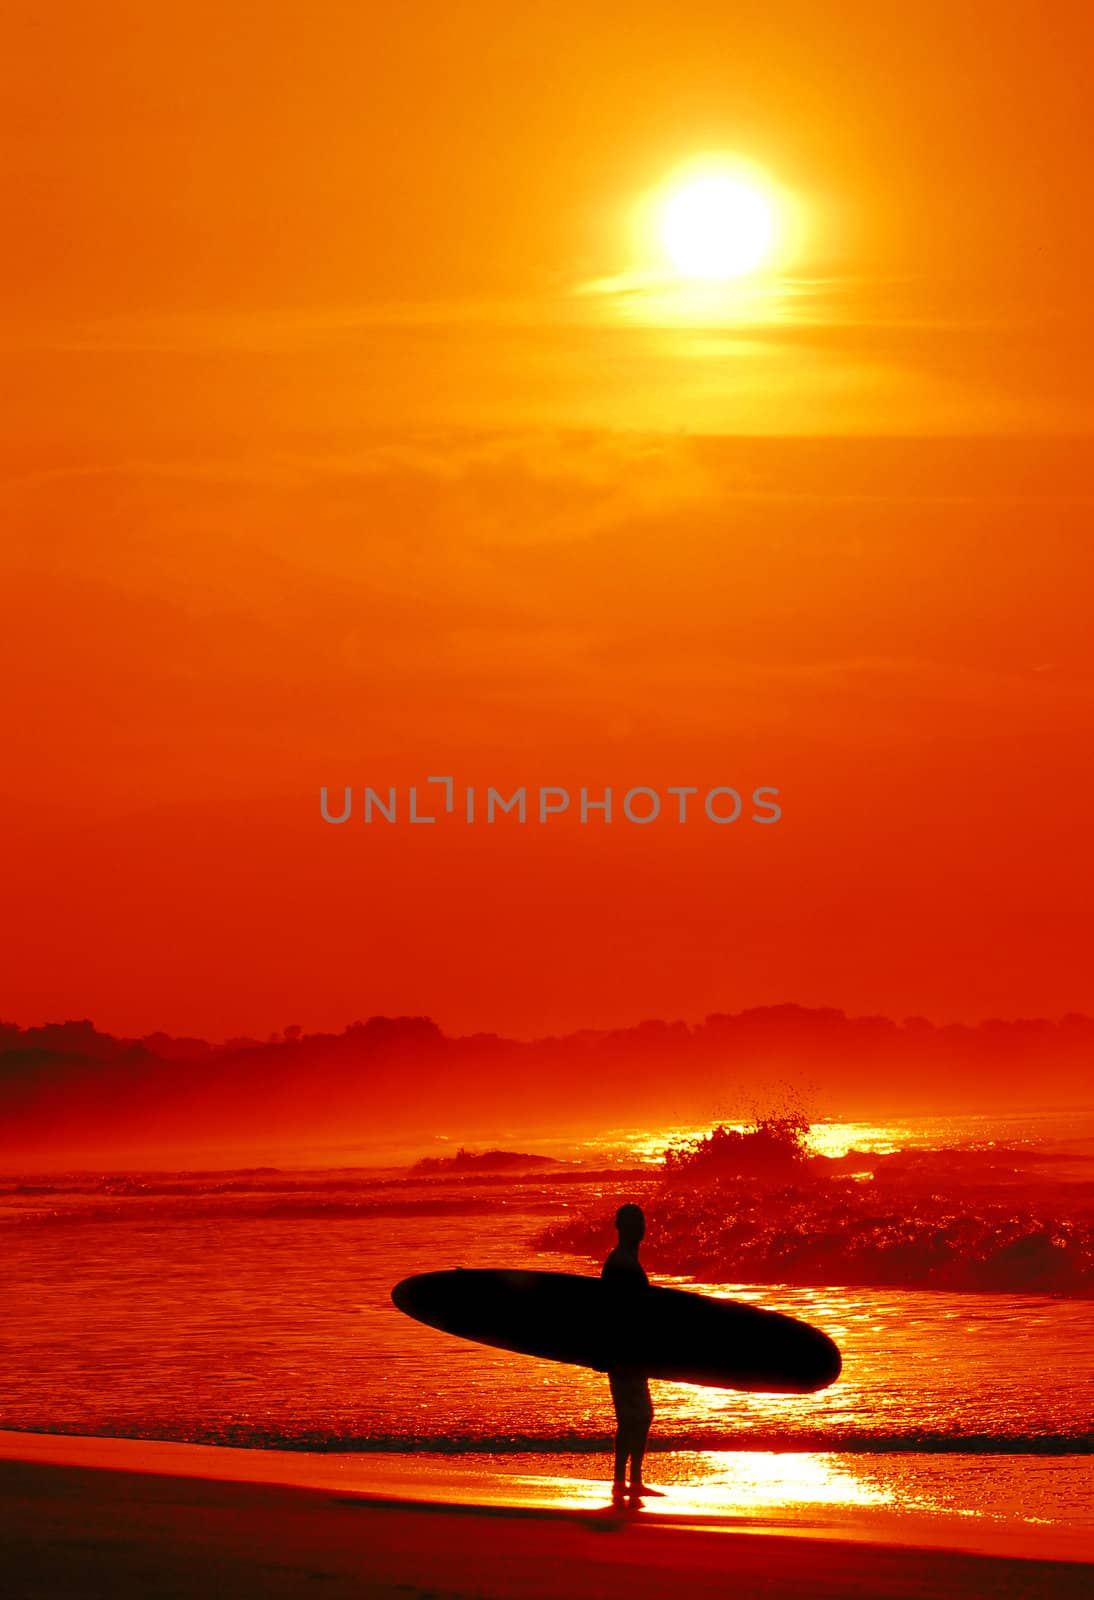 Surfer in tropical location with sunset by ftlaudgirl